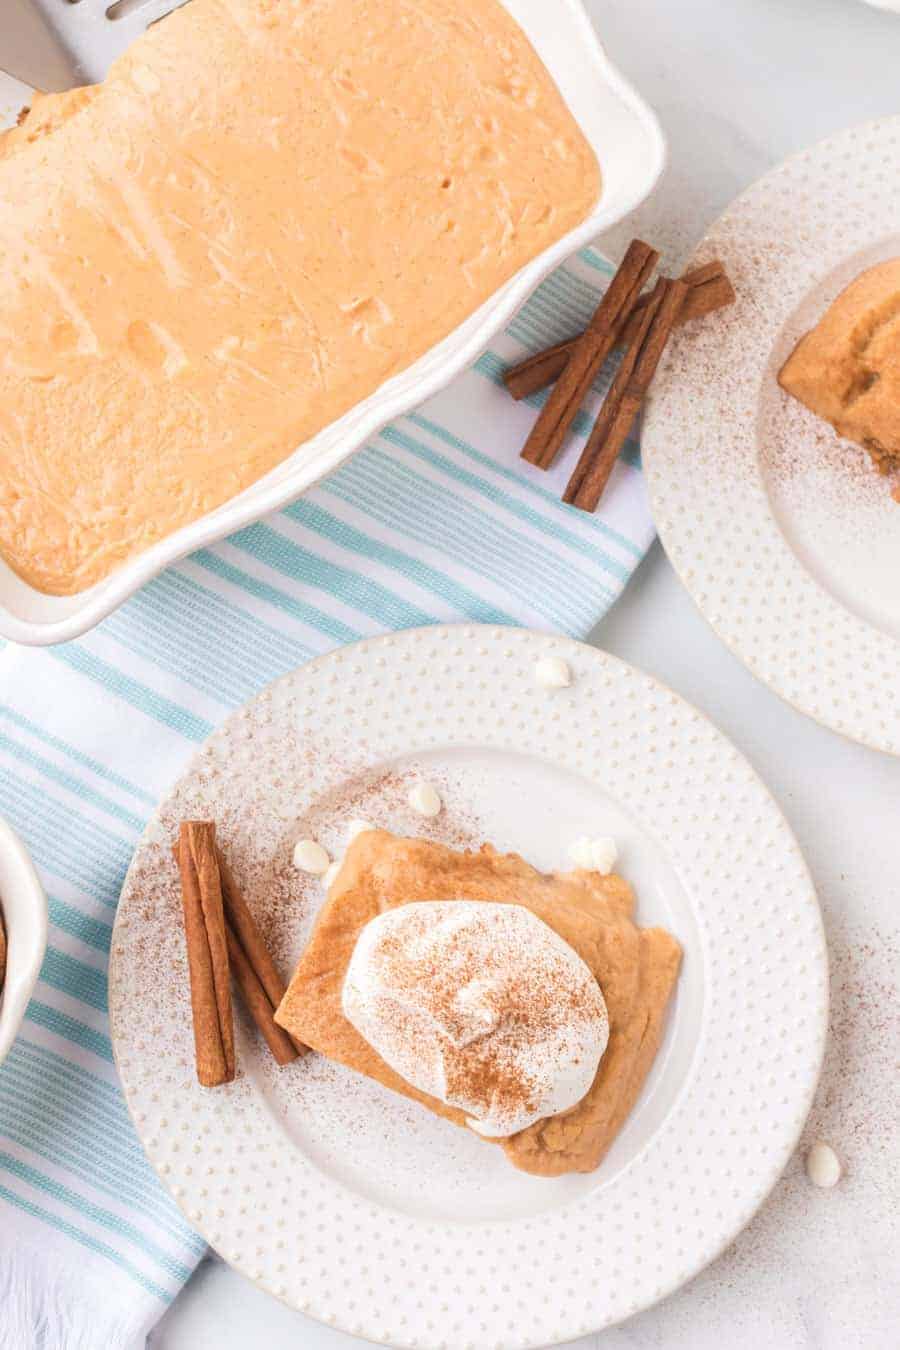 Homemade pumpkin pie pudding cups combine all your favorite sweet and warm flavors of pumpkin pie with the fun experience of enjoying individual pudding cups! #pumpkinpiepudding #puddingcups #pudding #pumpkinpie #pumpkindesserts #pumpkinspice